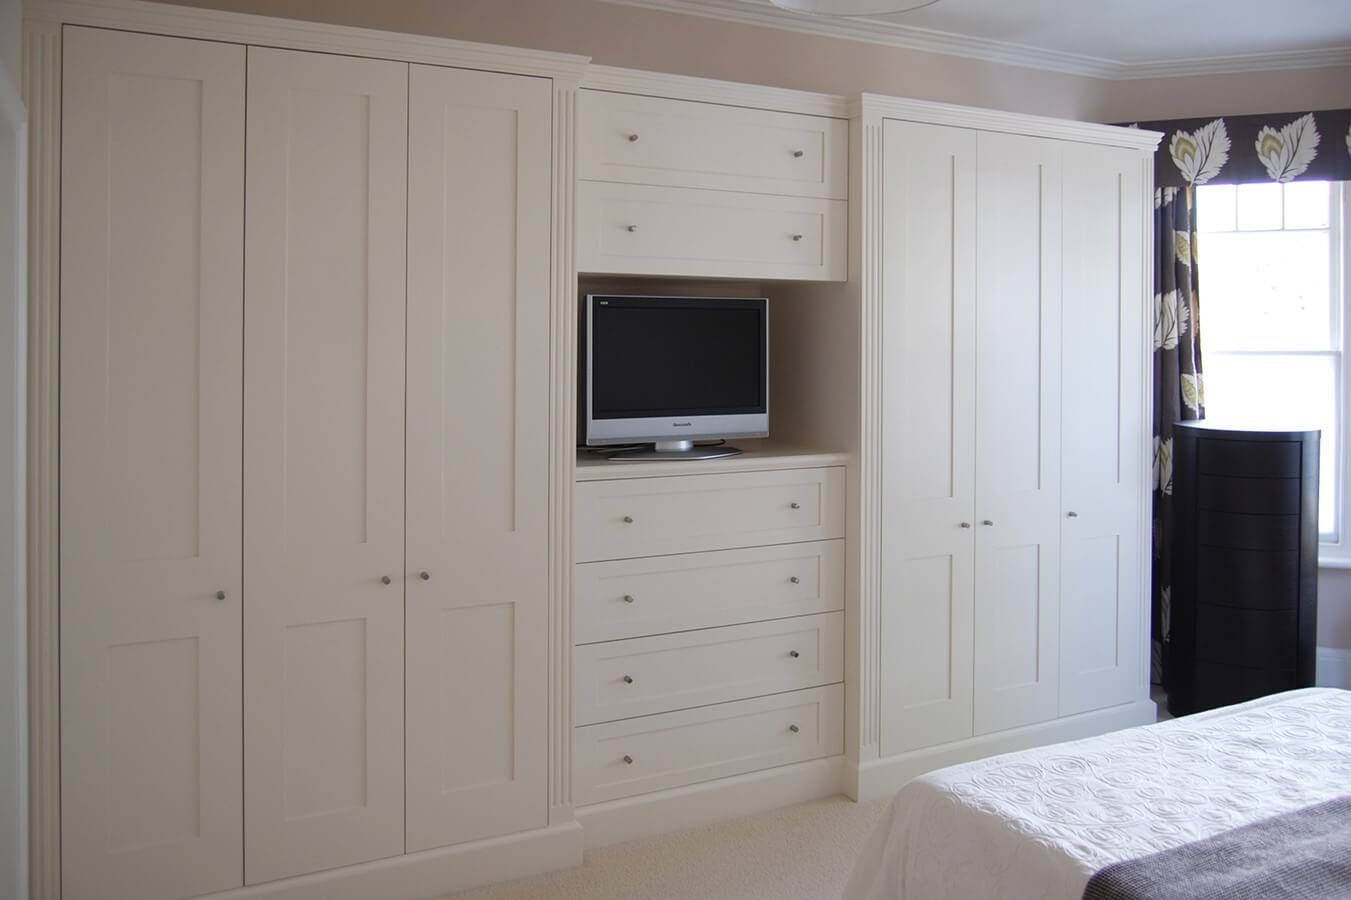 Fitted Bedrooms | Wardrobes, Beds And Chests Of Drawers Regarding Chest Of Drawers Wardrobes Combination (View 13 of 15)